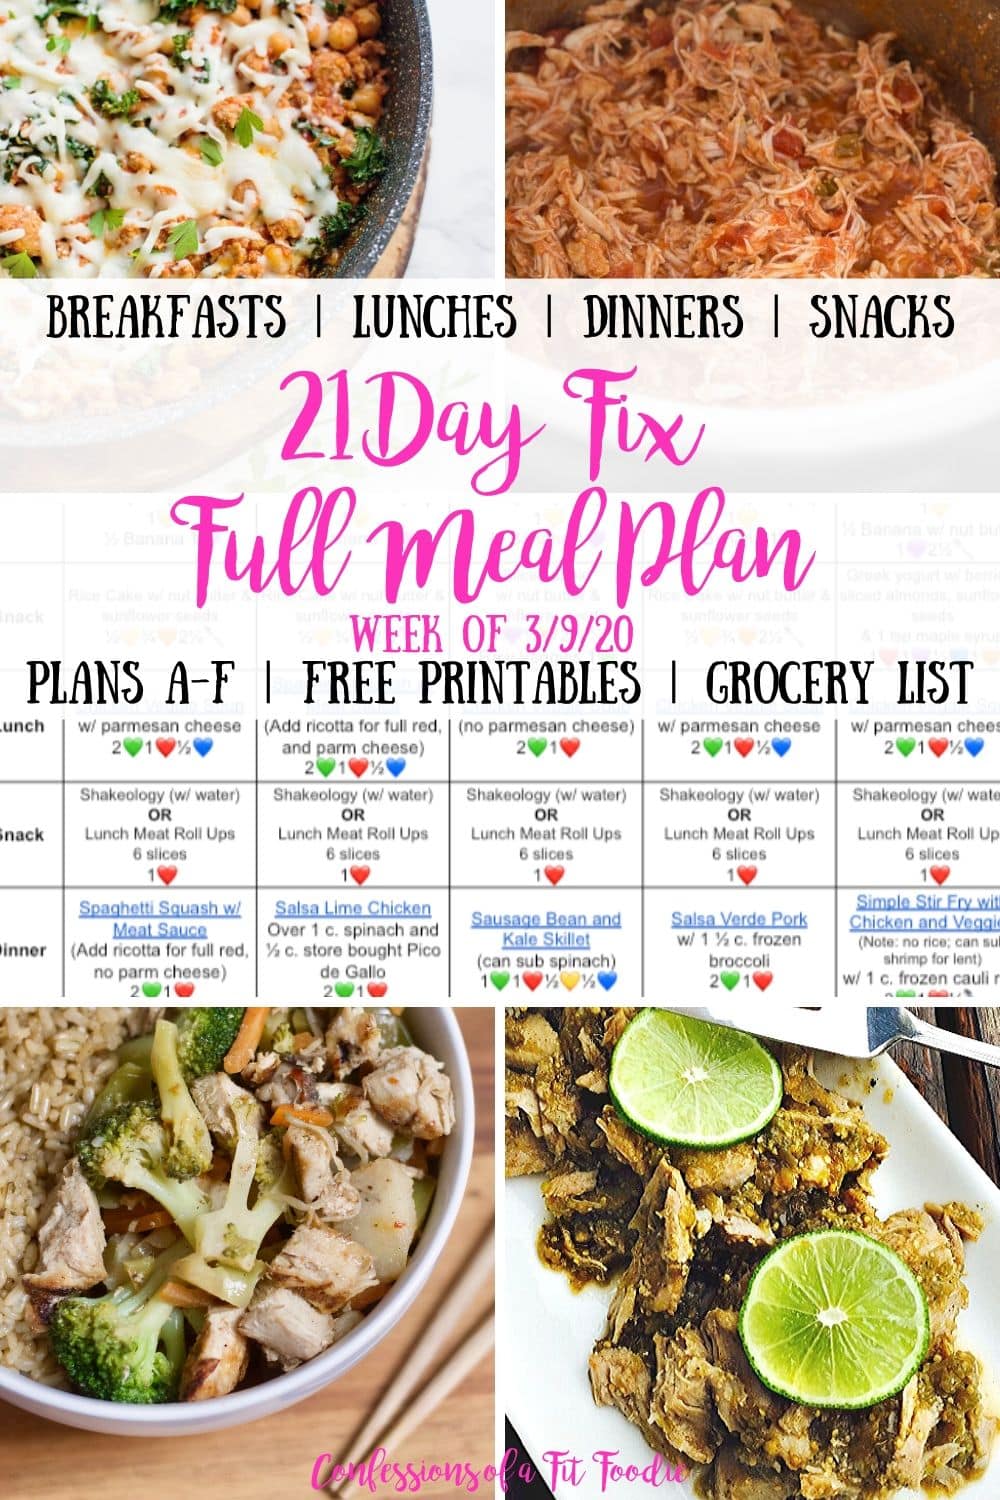 Whole30 Day 21: The Perfect Steak + A ThermoWorks Giveaway! - Nom